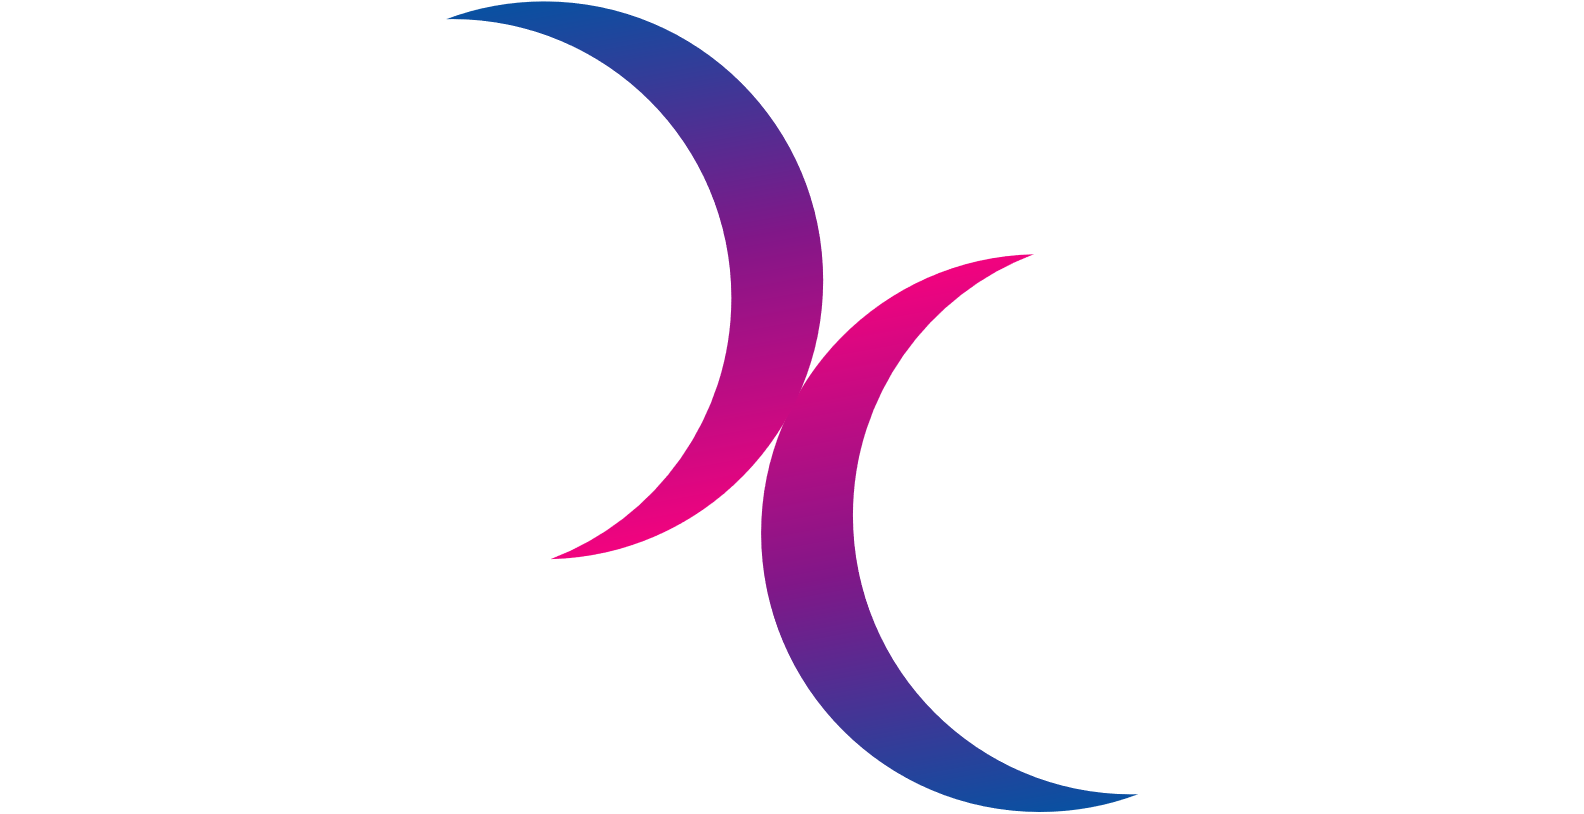 Two crescent moons in a gradient form pink to royal blue.